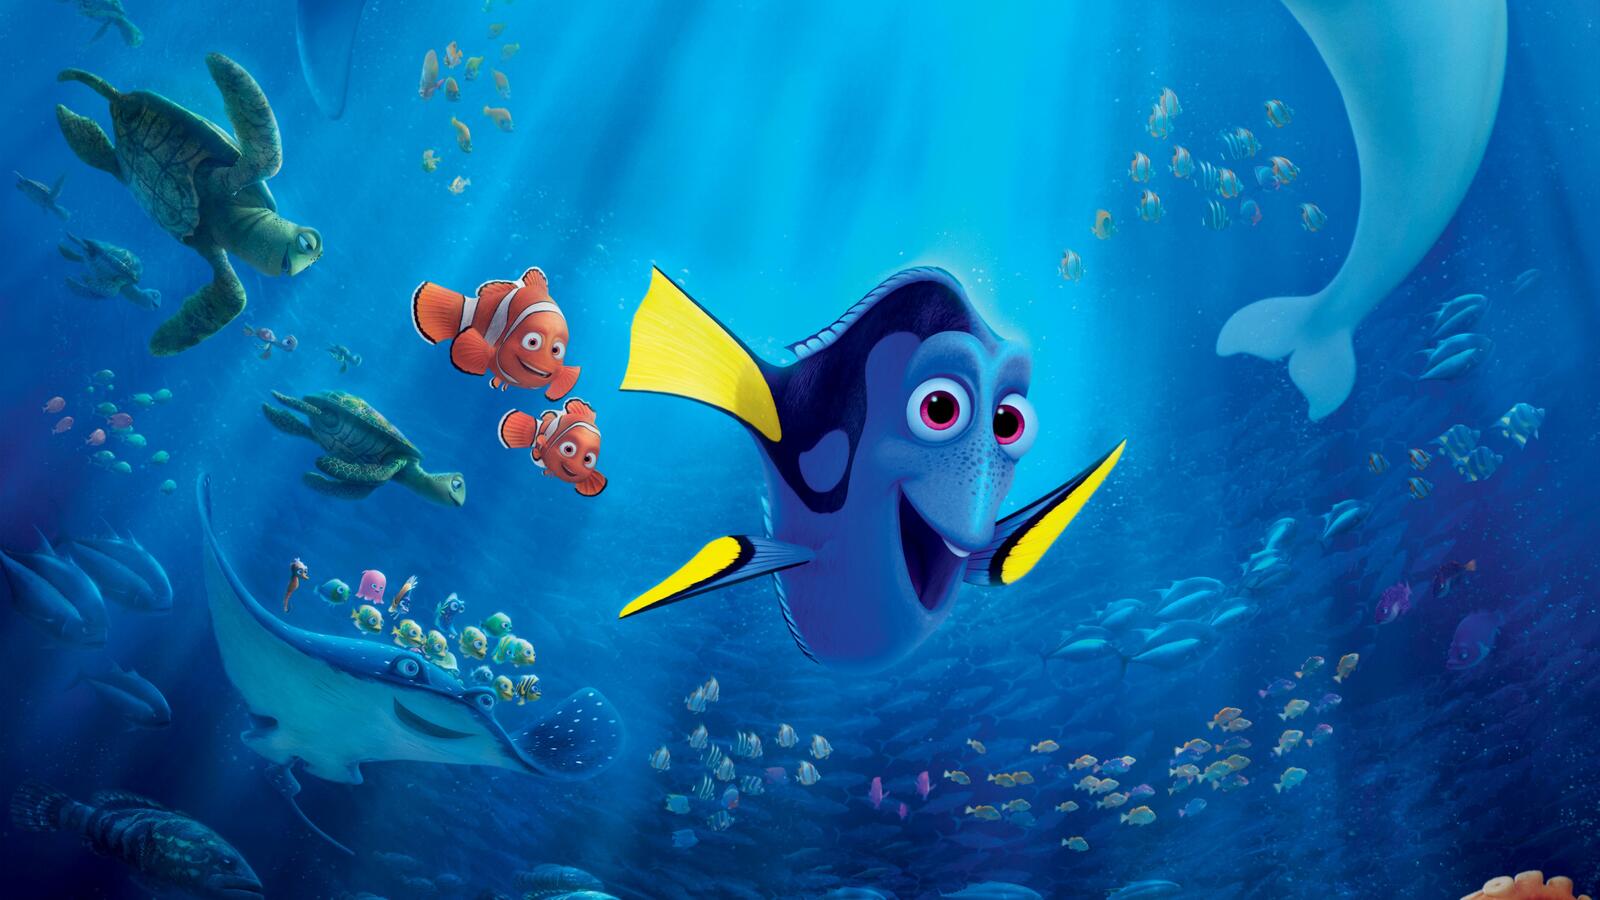 Wallpapers Finding Dory movies animated movies on the desktop